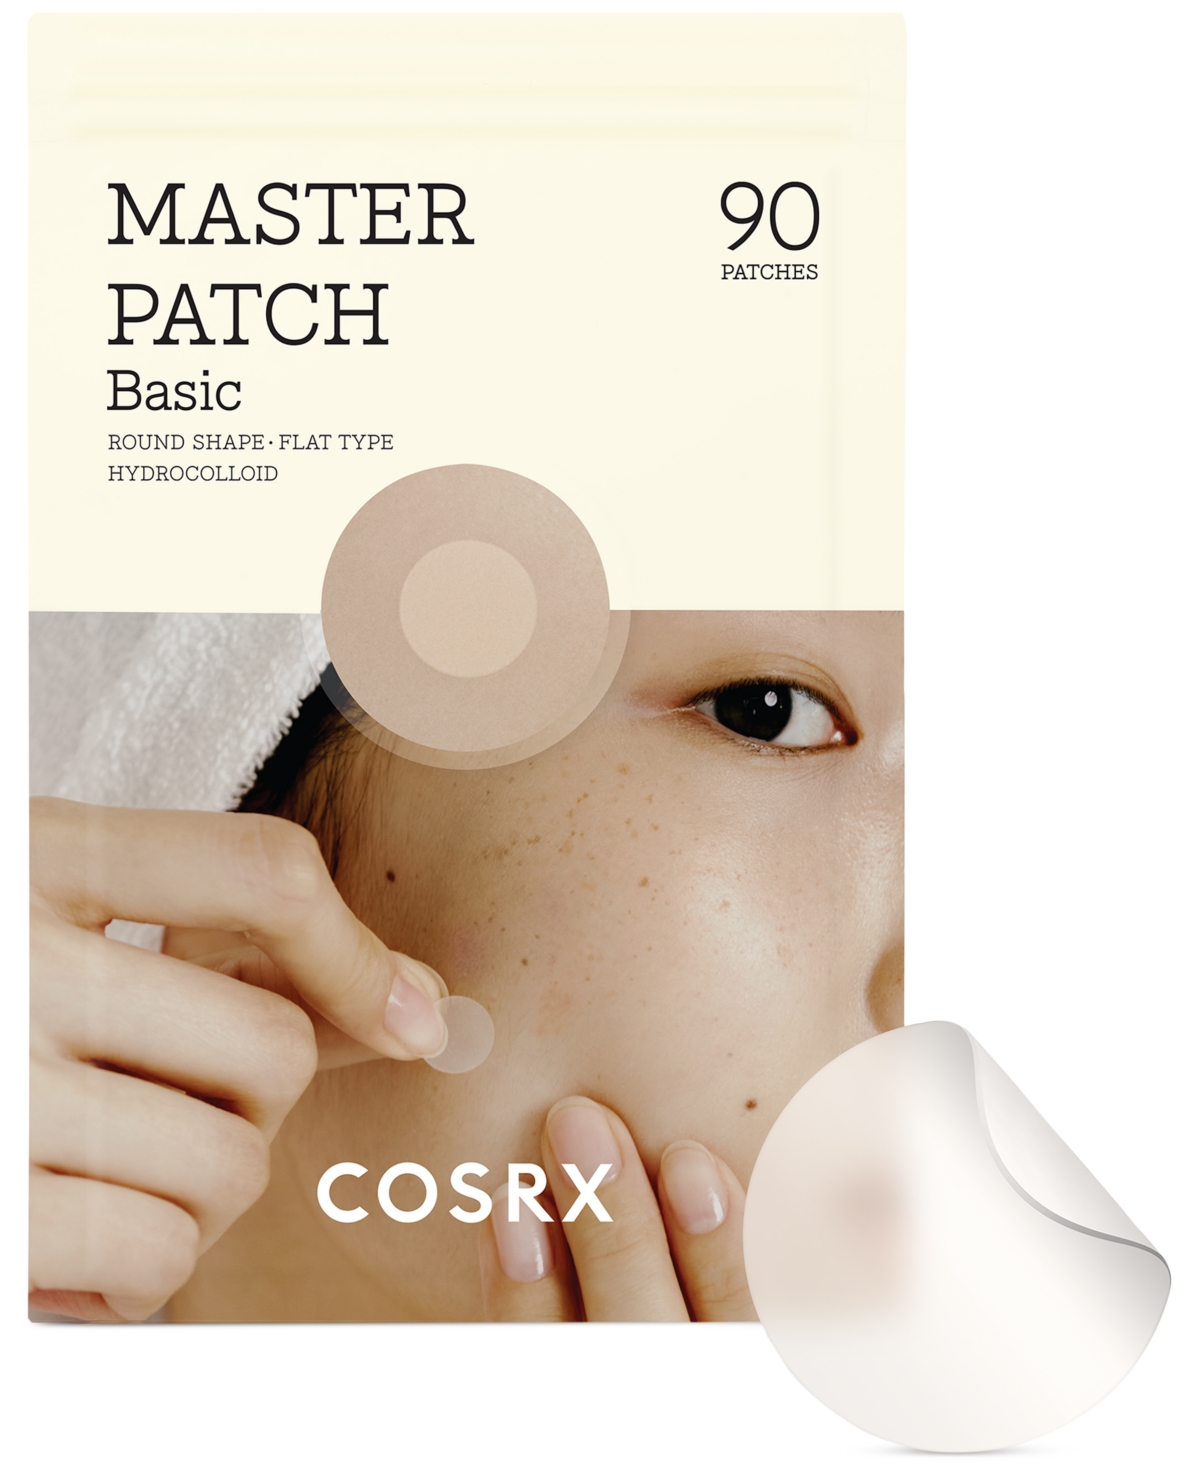 Cosrx Master Patch Basic, 90 Patches In No Color